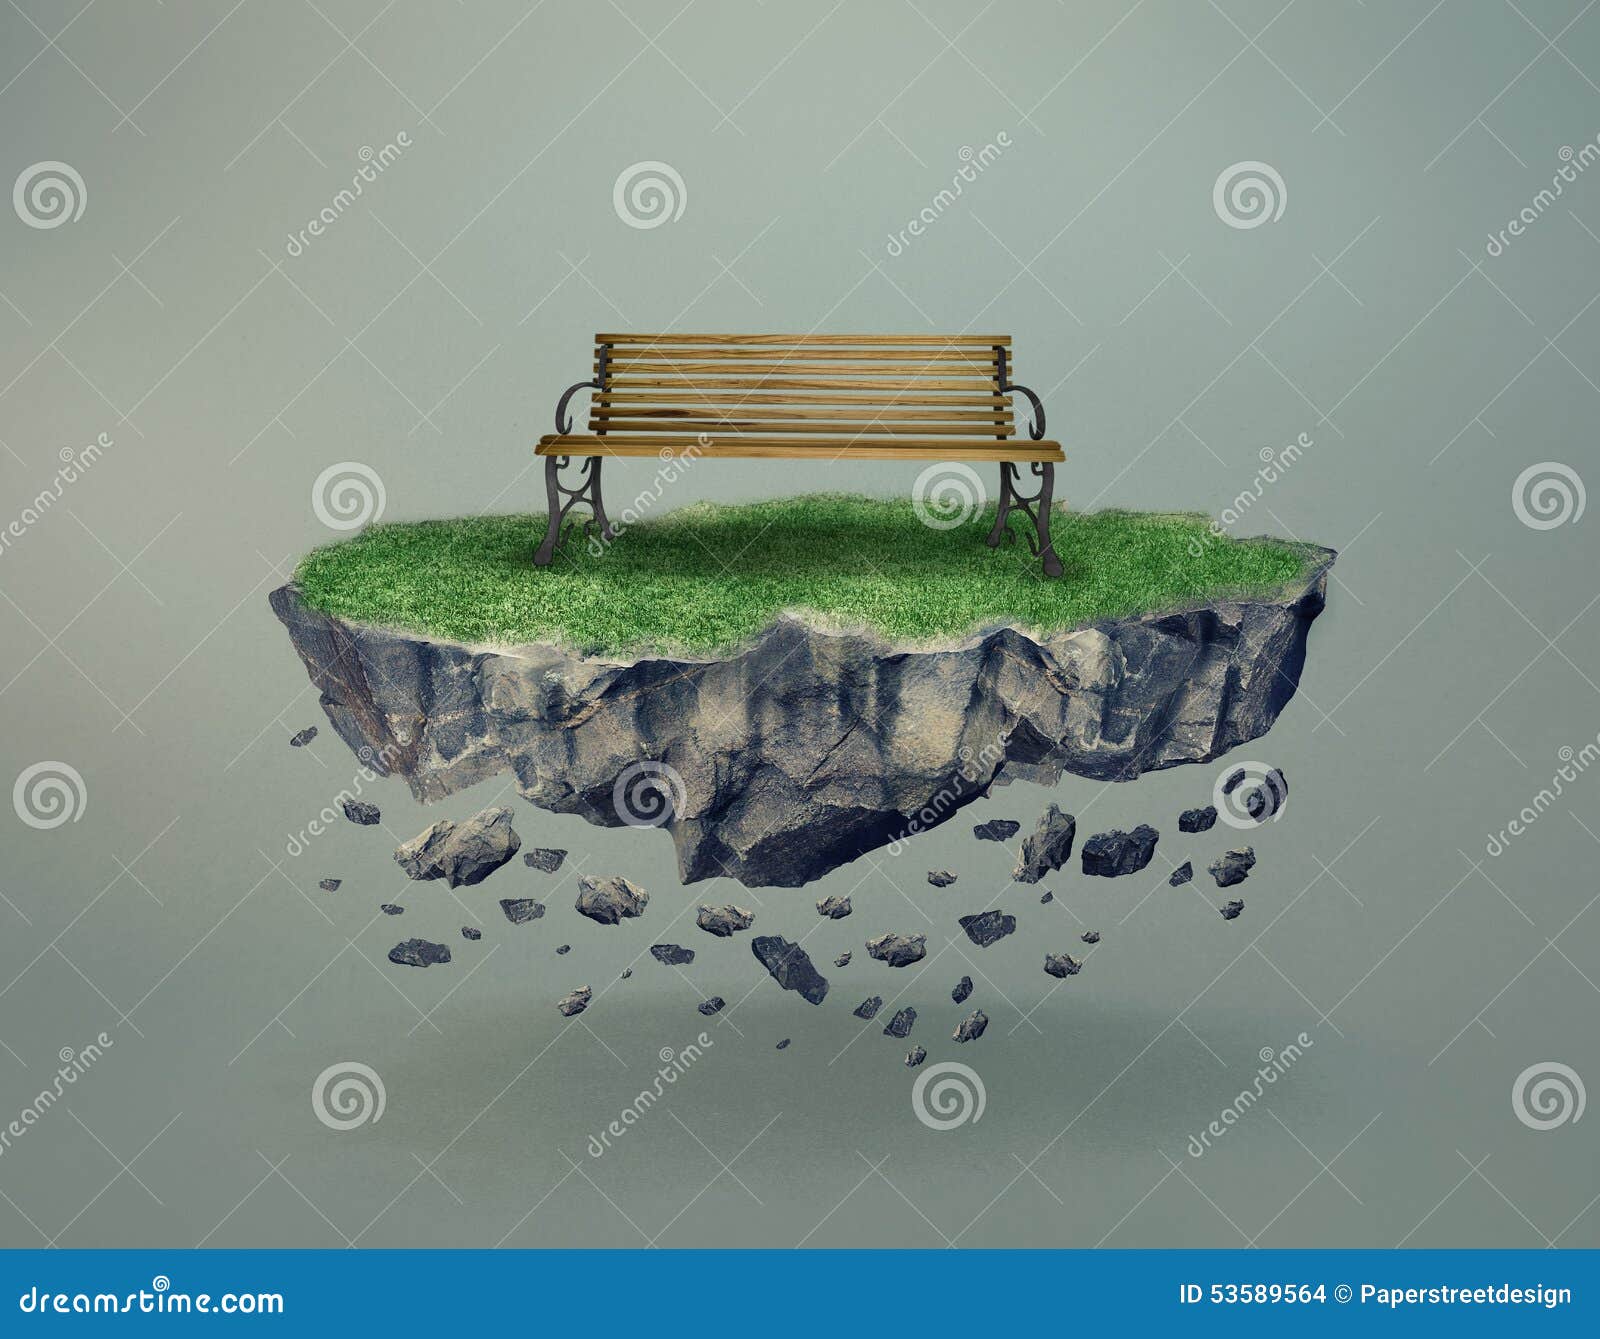 empty bench on a stony island floating in midair